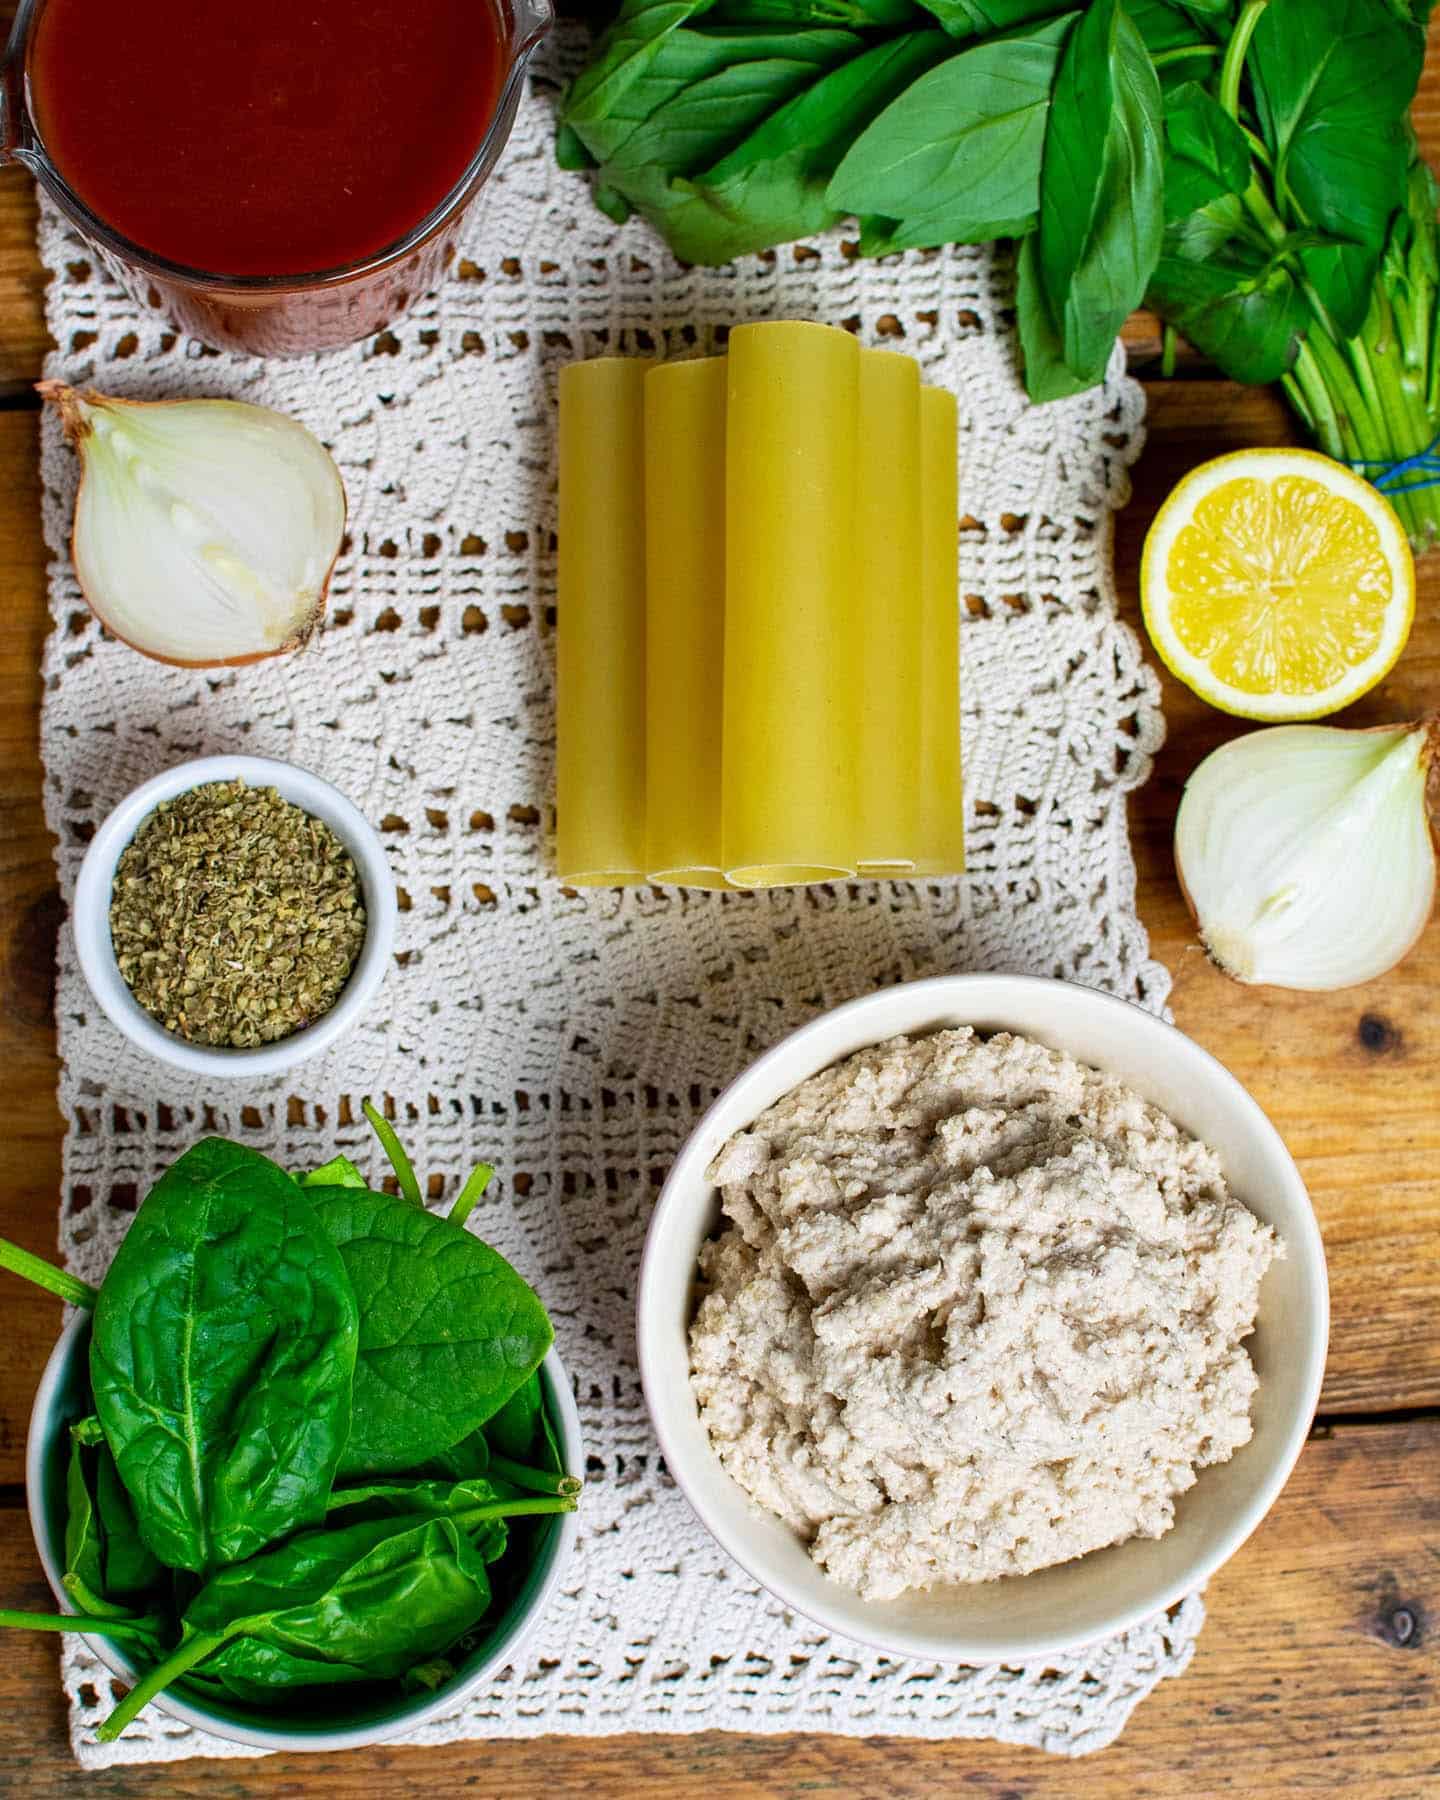 Top down view of ingredients laid out on white fabric, showing pasta tubes, macadamia ricotta, onion, lemon, spinach, fresh basil, dried oregano and passata